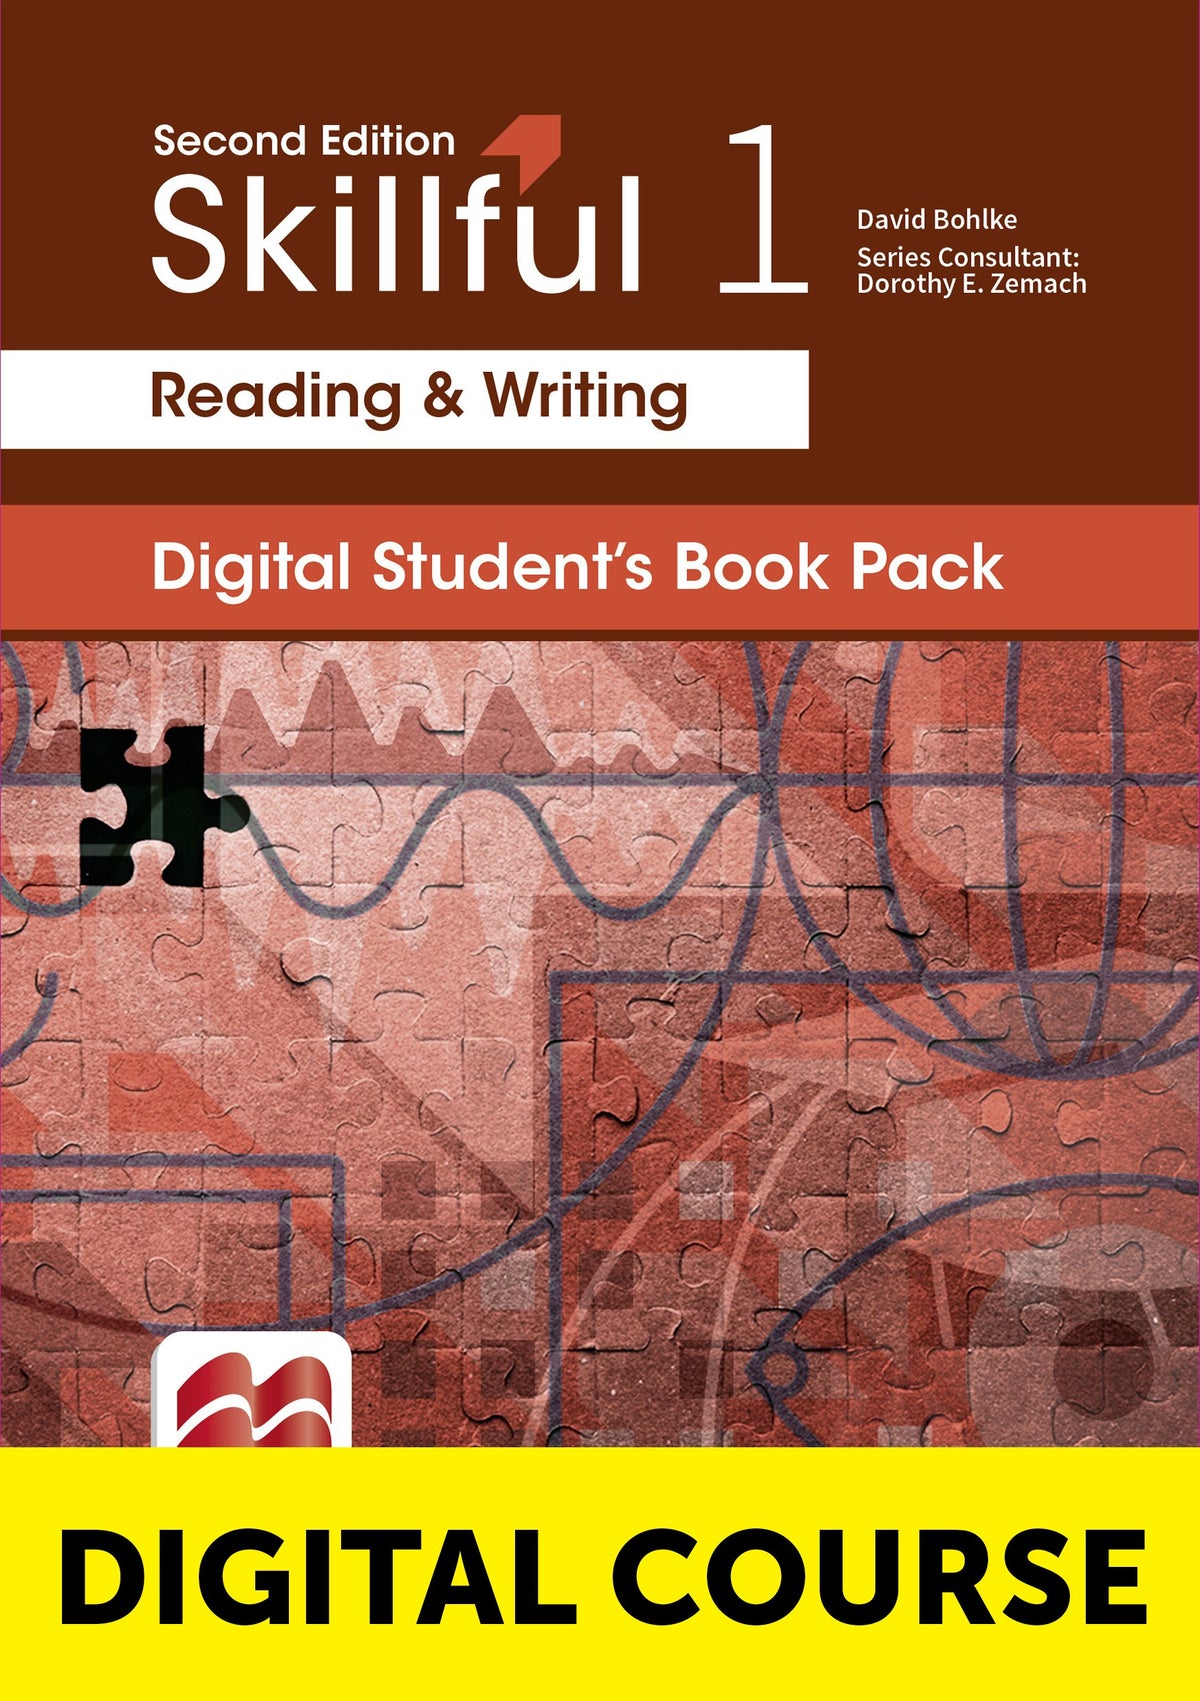 Skillful Second Edition Level 1 Reading and Writing Digital